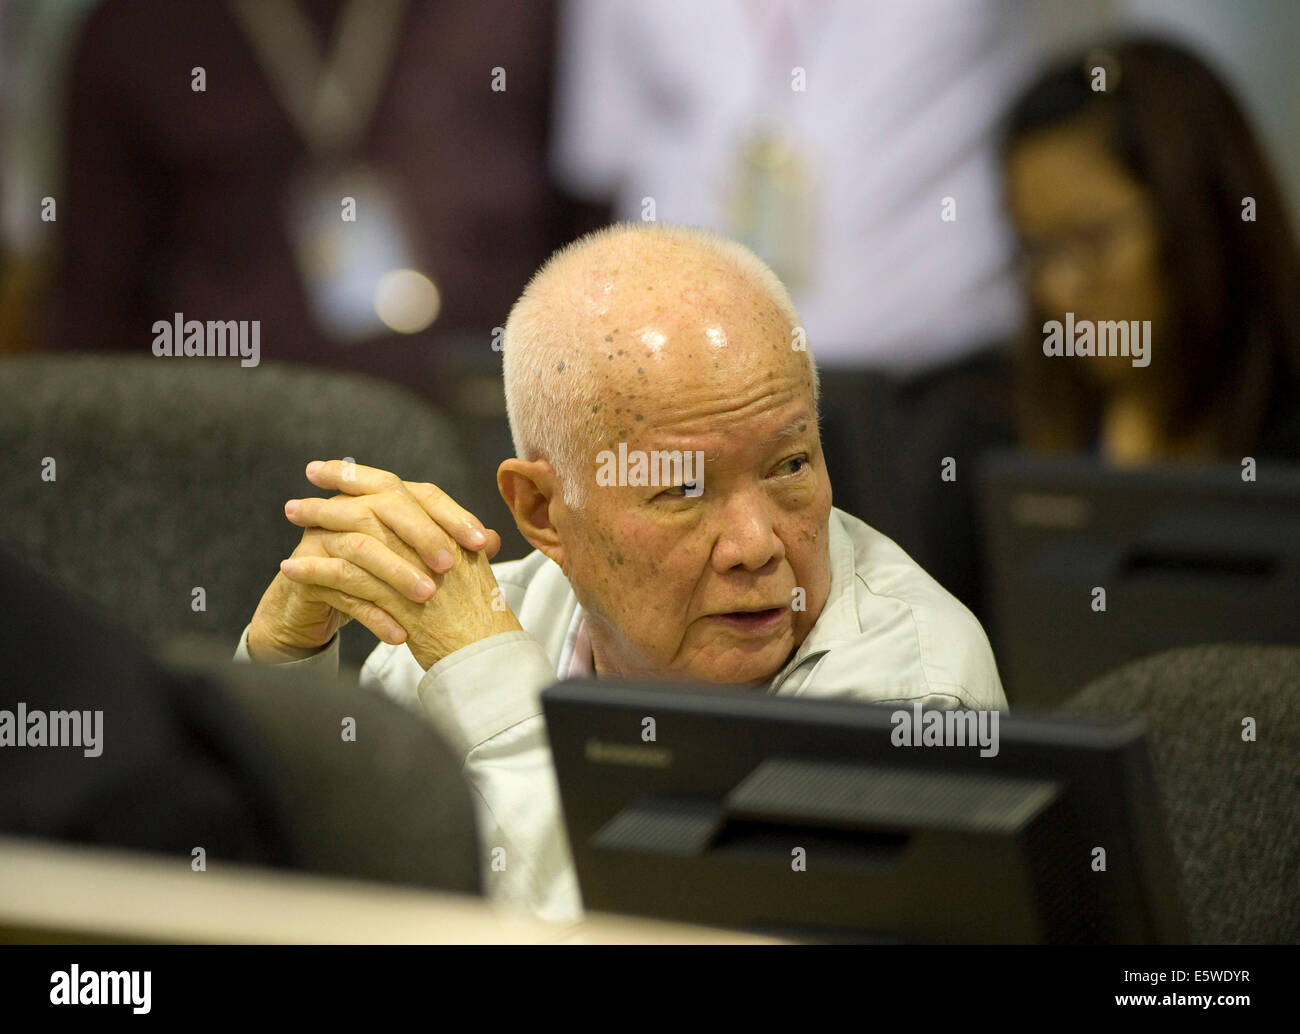 Phnom Penh, Cambodia. 7th Aug, 2014. Khieu Samphan, 83, former head of state of the Democratic Kampuchea, known as Khmer Rouge regime, appears in the courtroom in Phnom Penh, Cambodia, Aug. 7, 2014. The United Nations war crimes tribunal convicted two aging former top leaders of the Democratic Kampuchea, also known as Khmer Rouge, of atrocity crimes against humanity and sentenced them to life in prison, according to a verdict pronounced by the tribunal's president Nil Nonn on Thursday. Credit:  ECCC/Xinhua/Alamy Live News Stock Photo